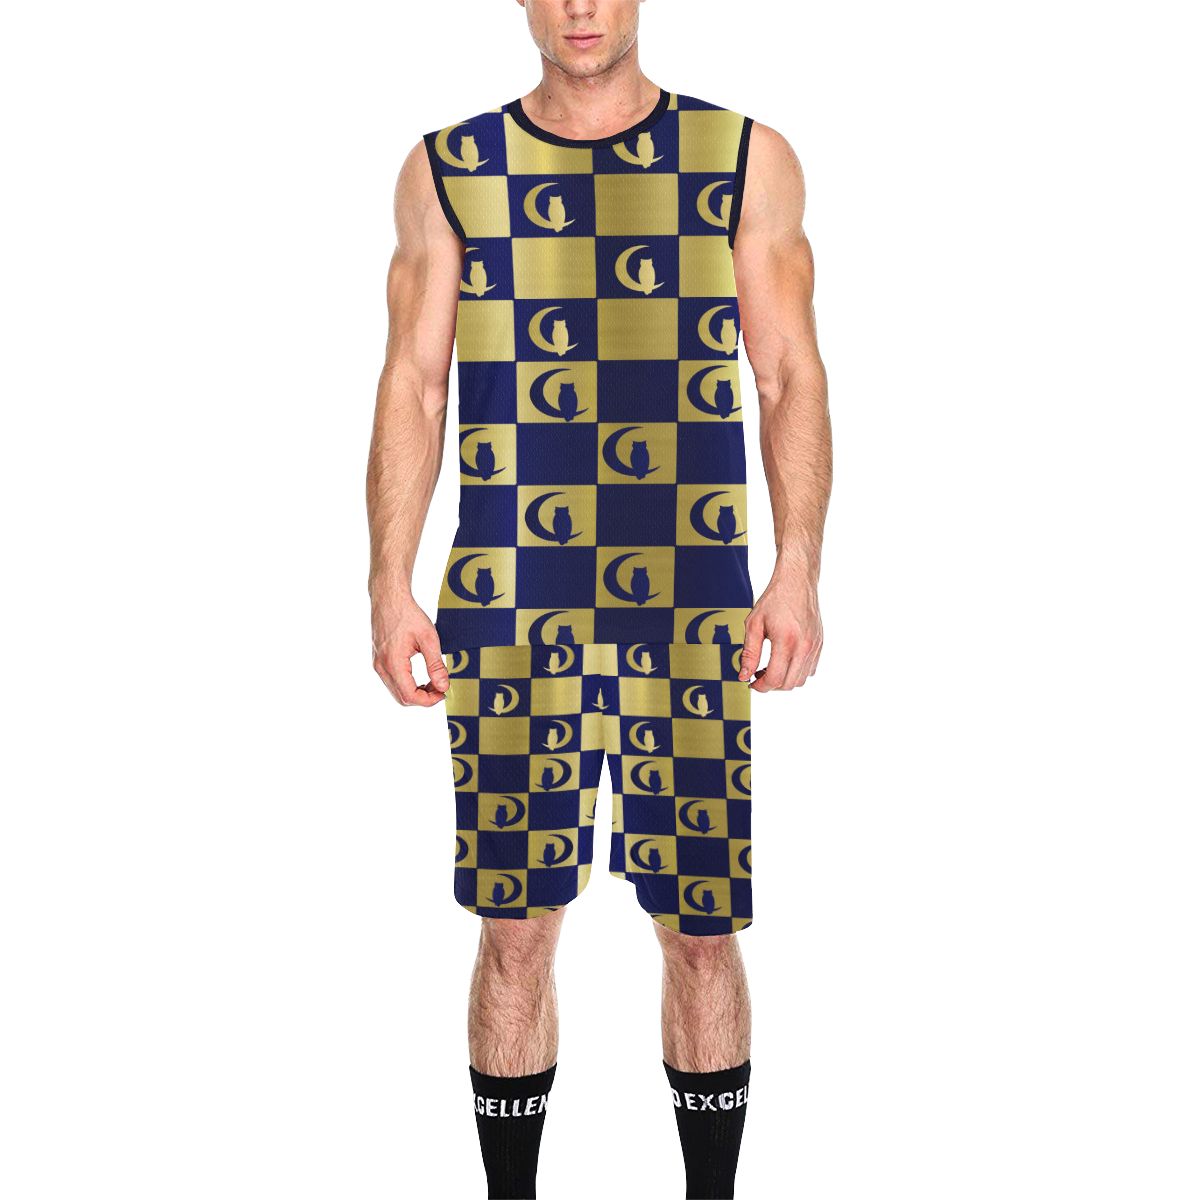 LCC Deluxe Chest board All Over Print Basketball Uniform